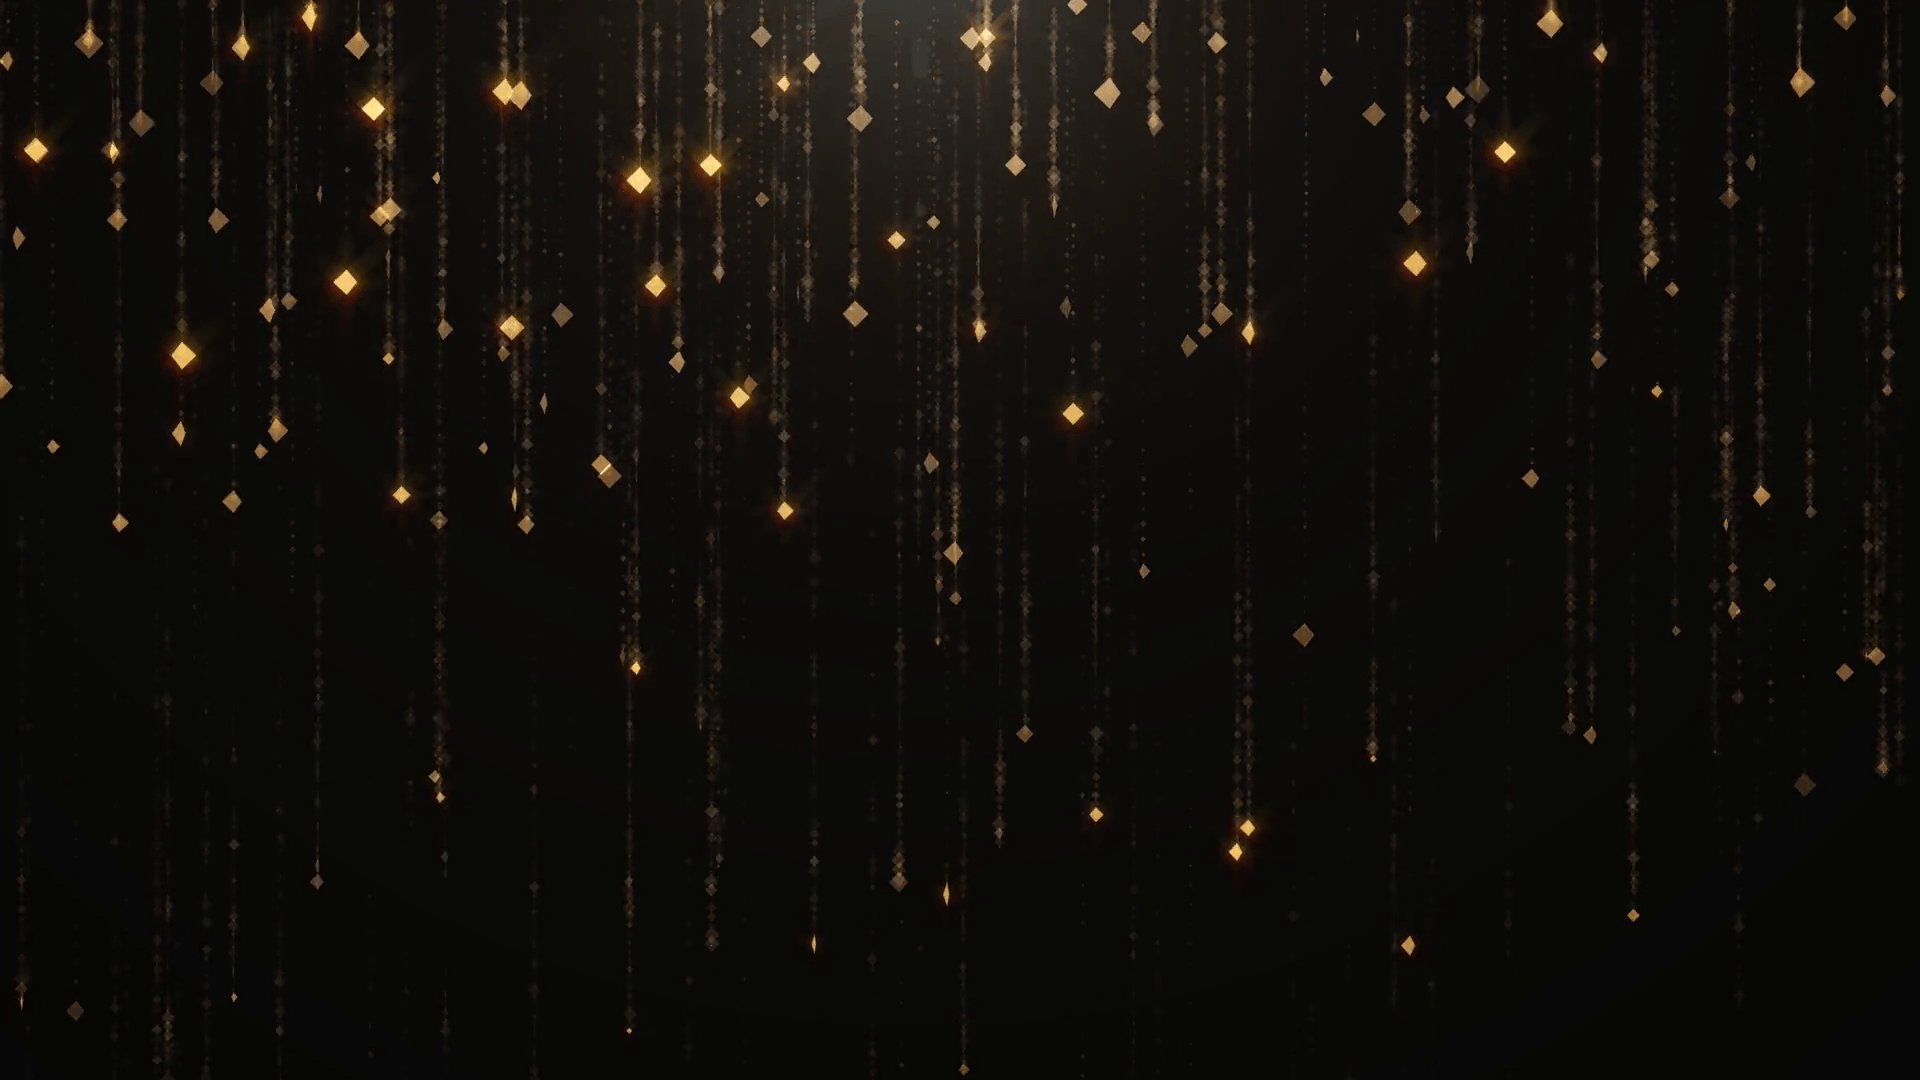 Falling gold particles flicker and shimmer against a black